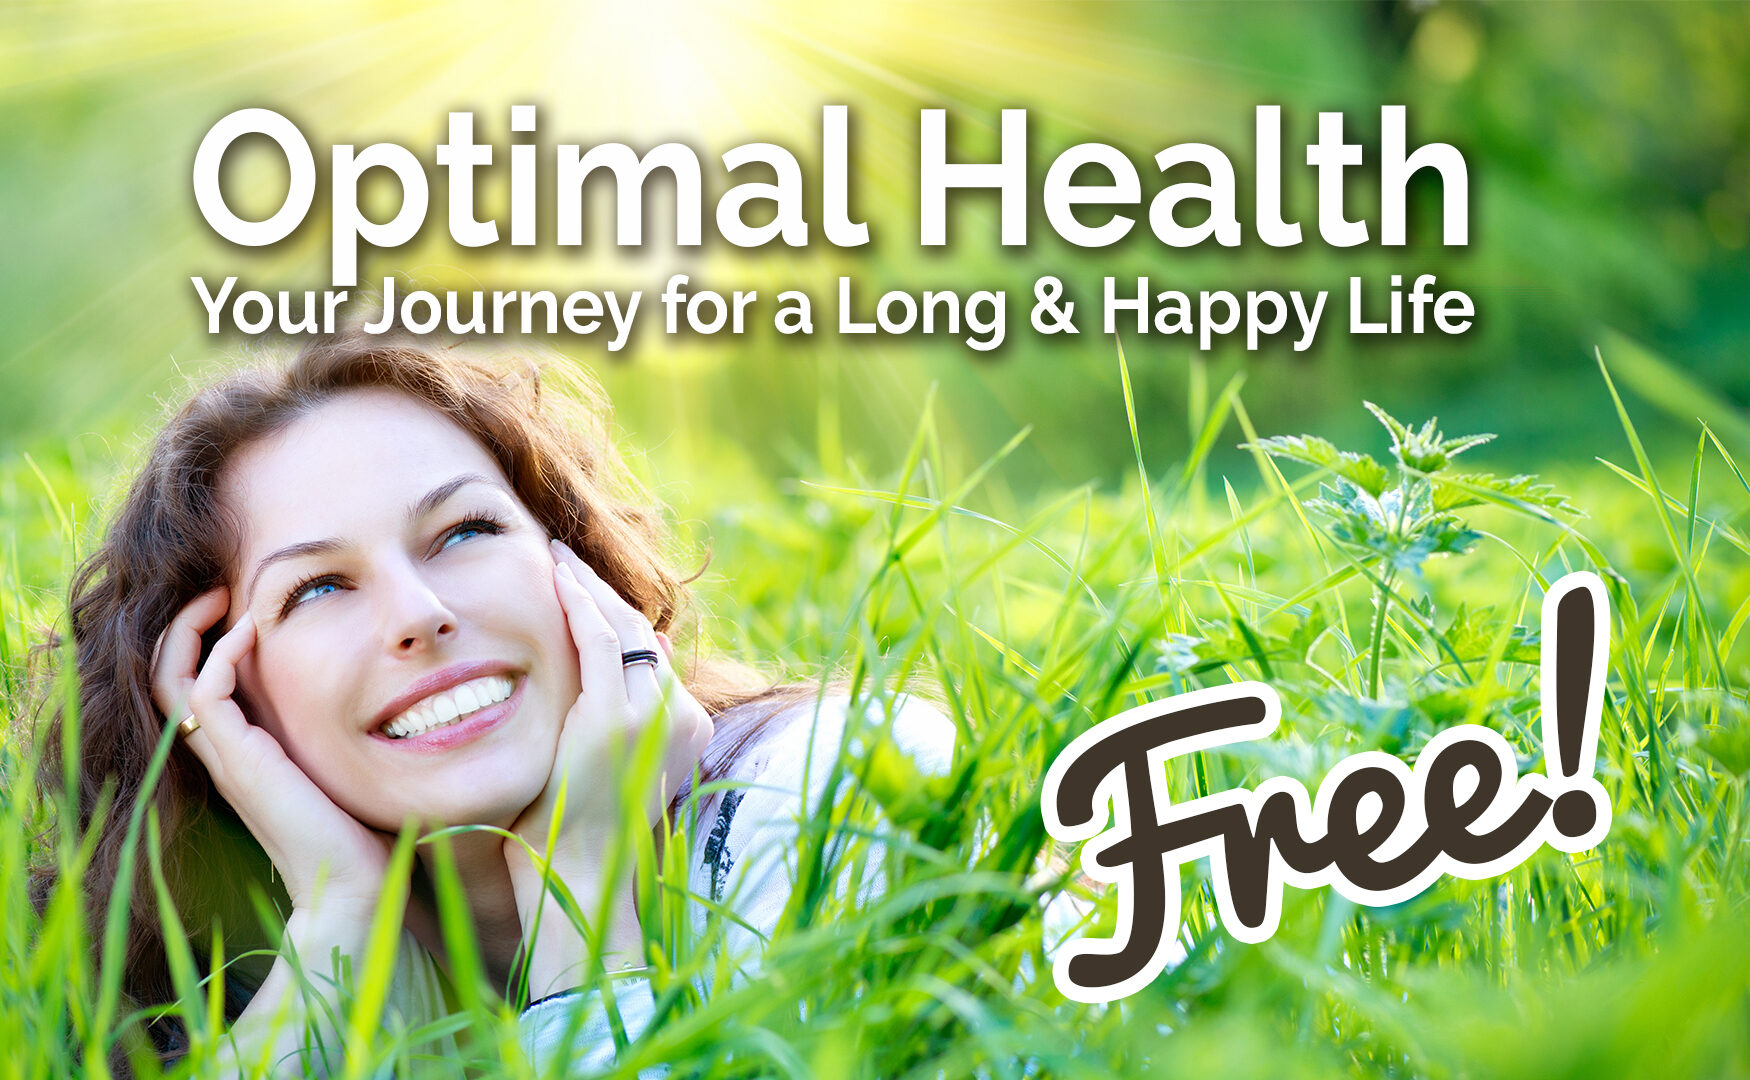 Optimal Health – Your Journey for Longevity – Harvard Research on the Blue Zones